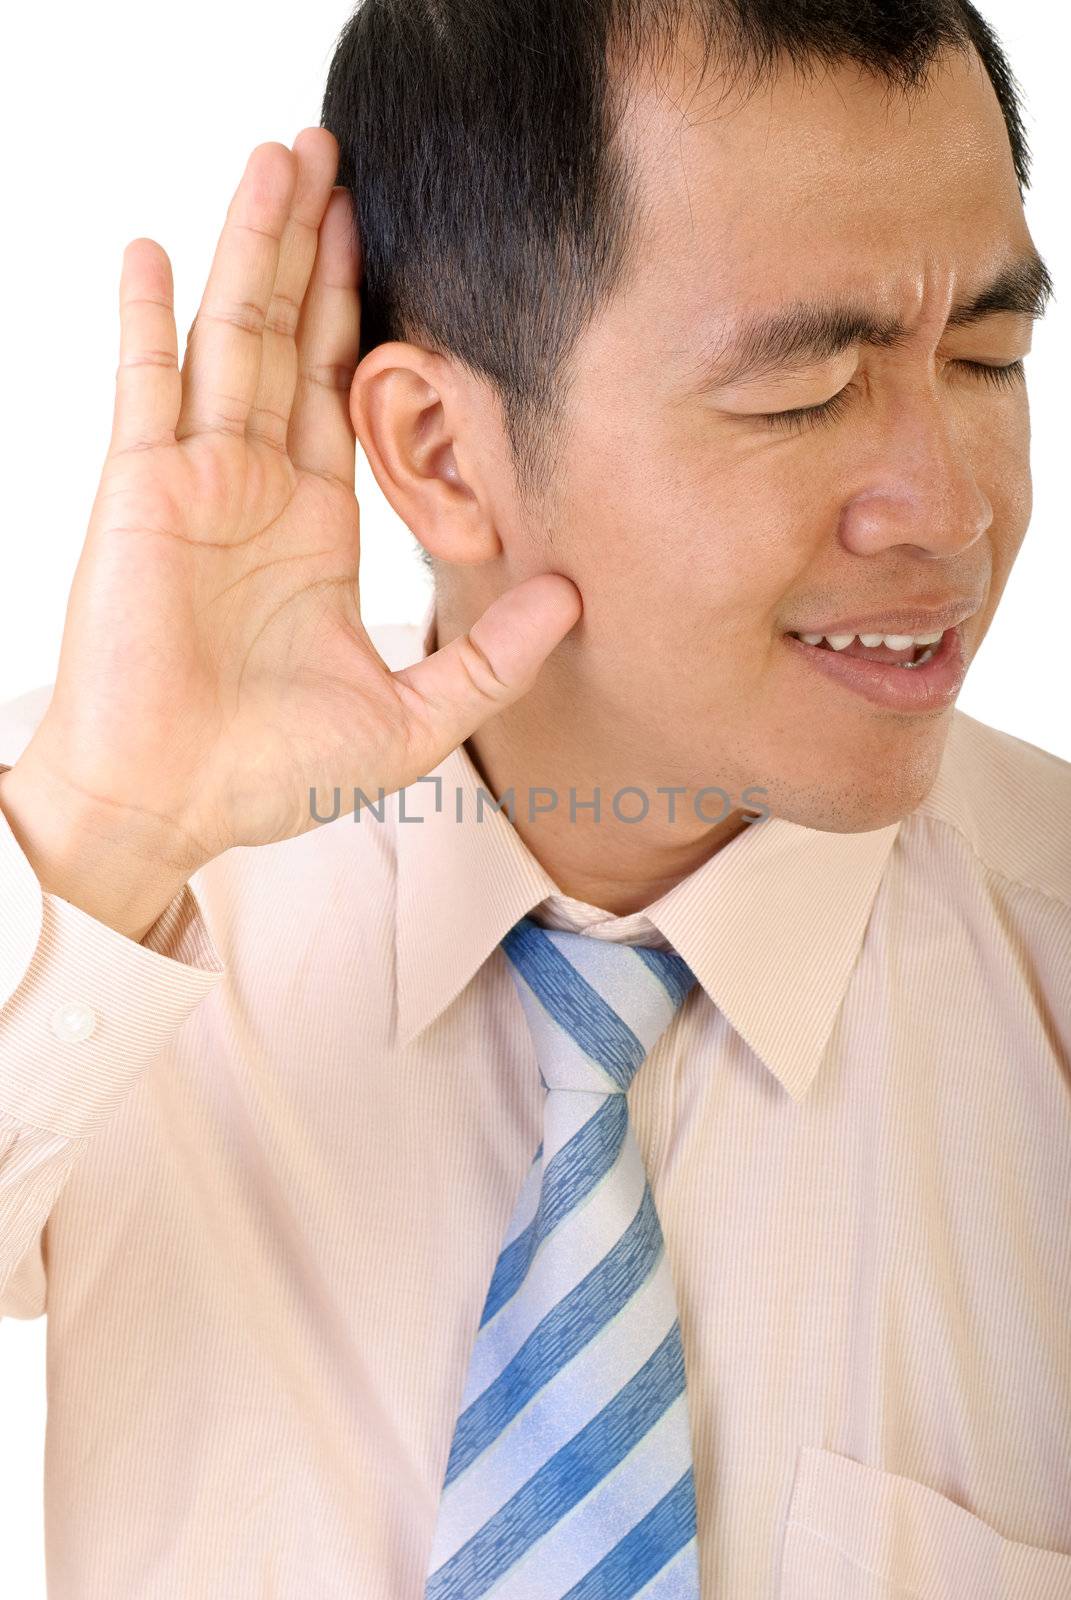 Businessman listen by gesture with his hand to ear to hear on white background.